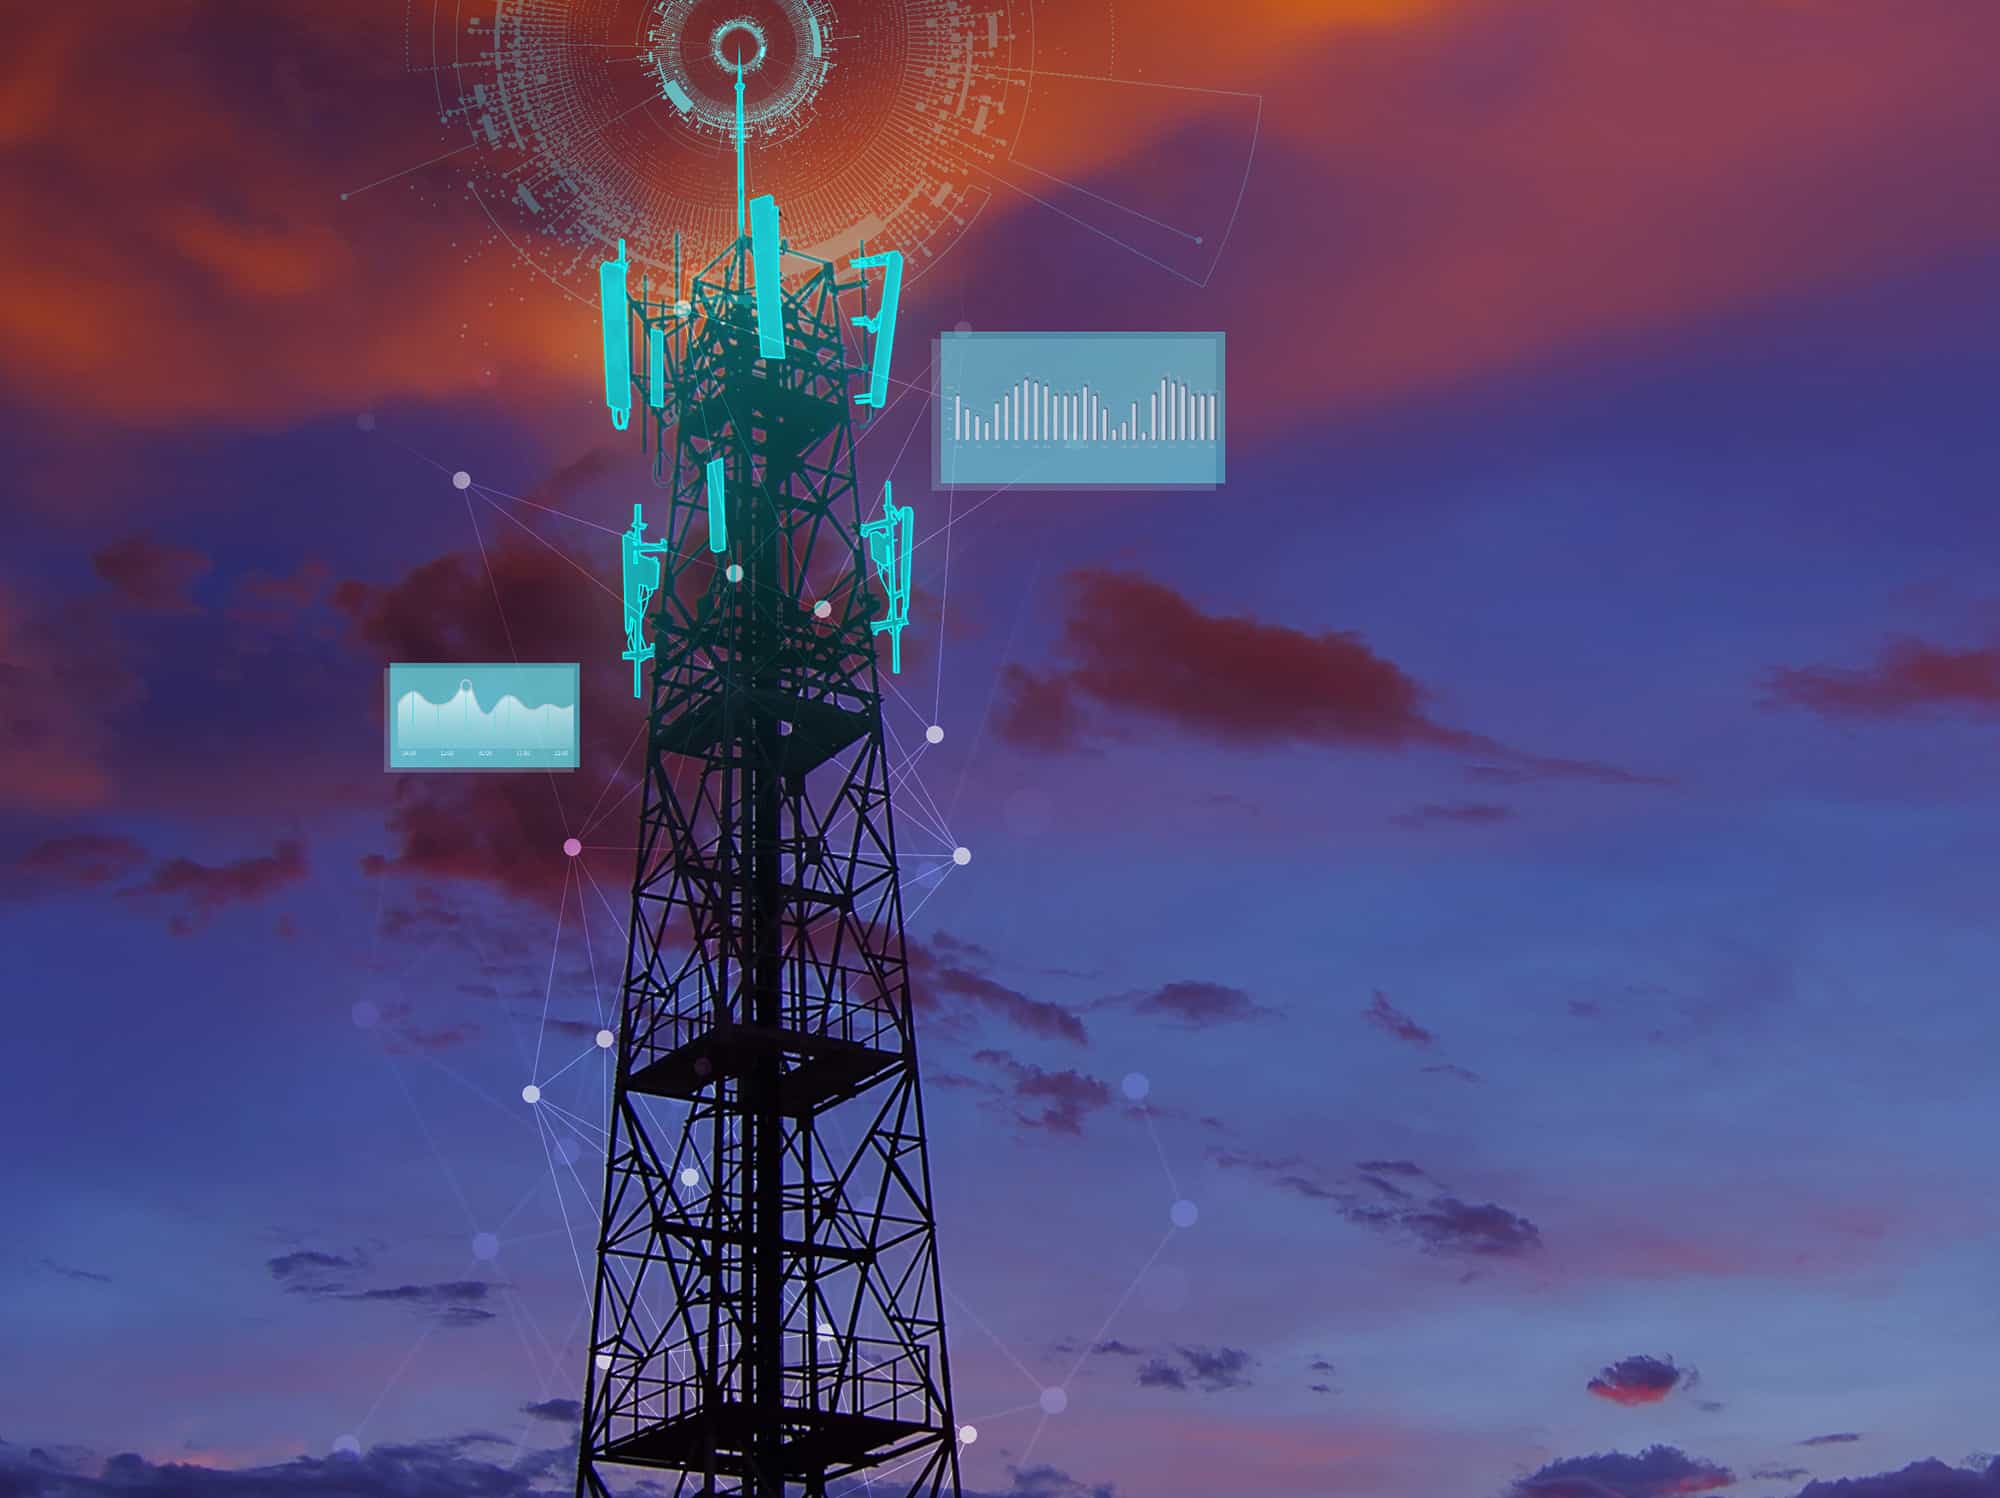 A telecommunications tower with digital overlays representing signal transmission and data analytics against a dramatic sunset sky.